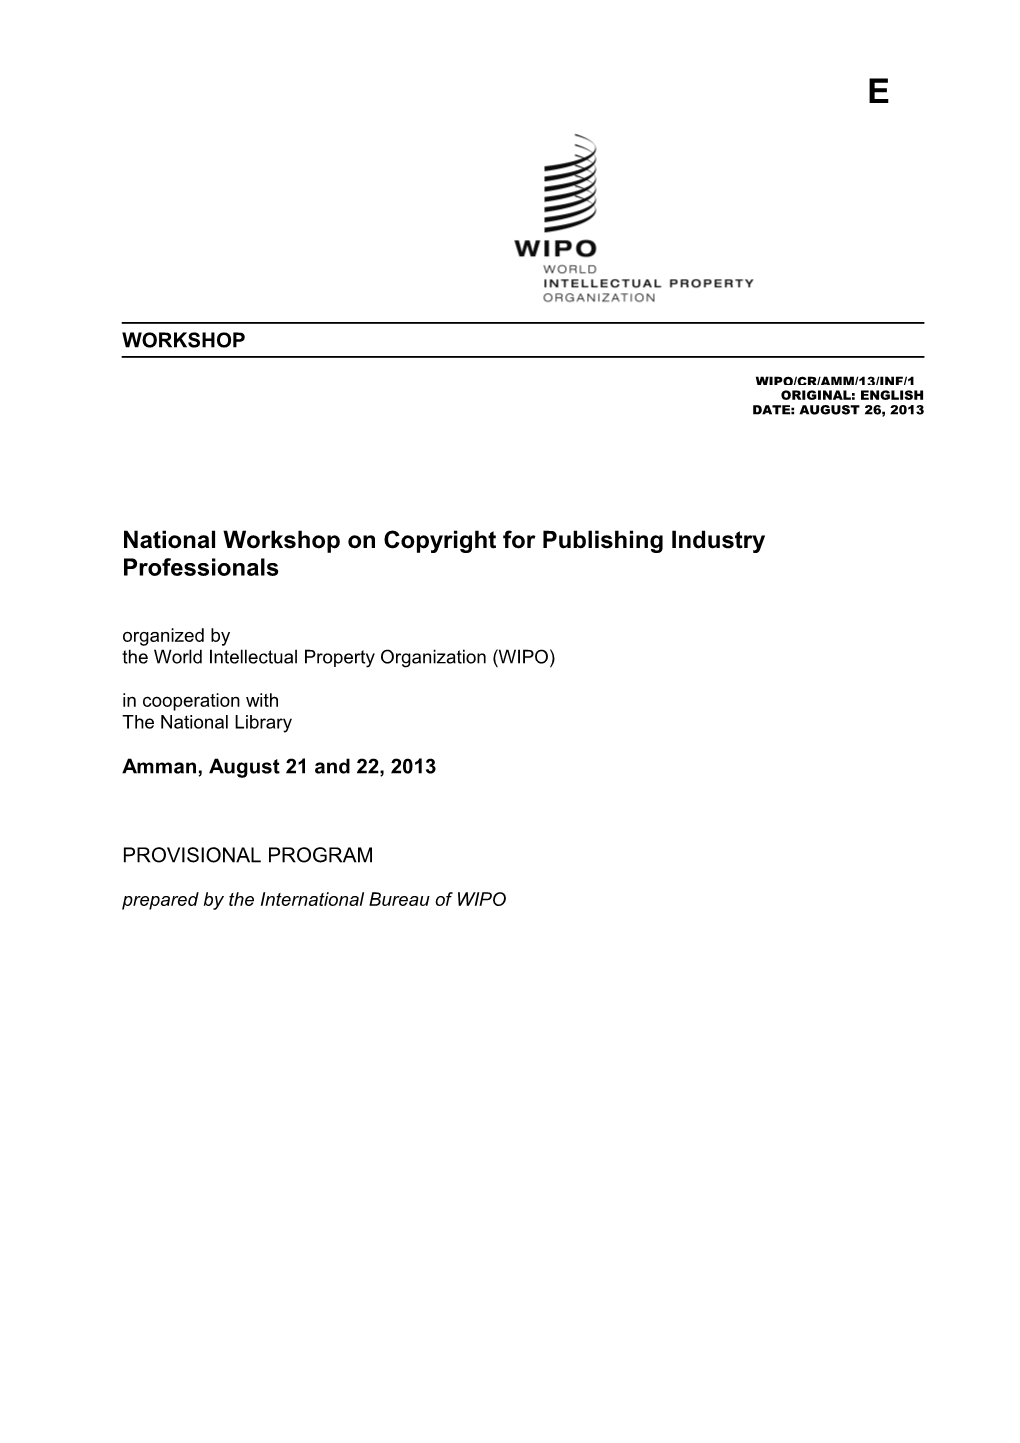 National Workshop on Copyright for Publishing Industry Professionals